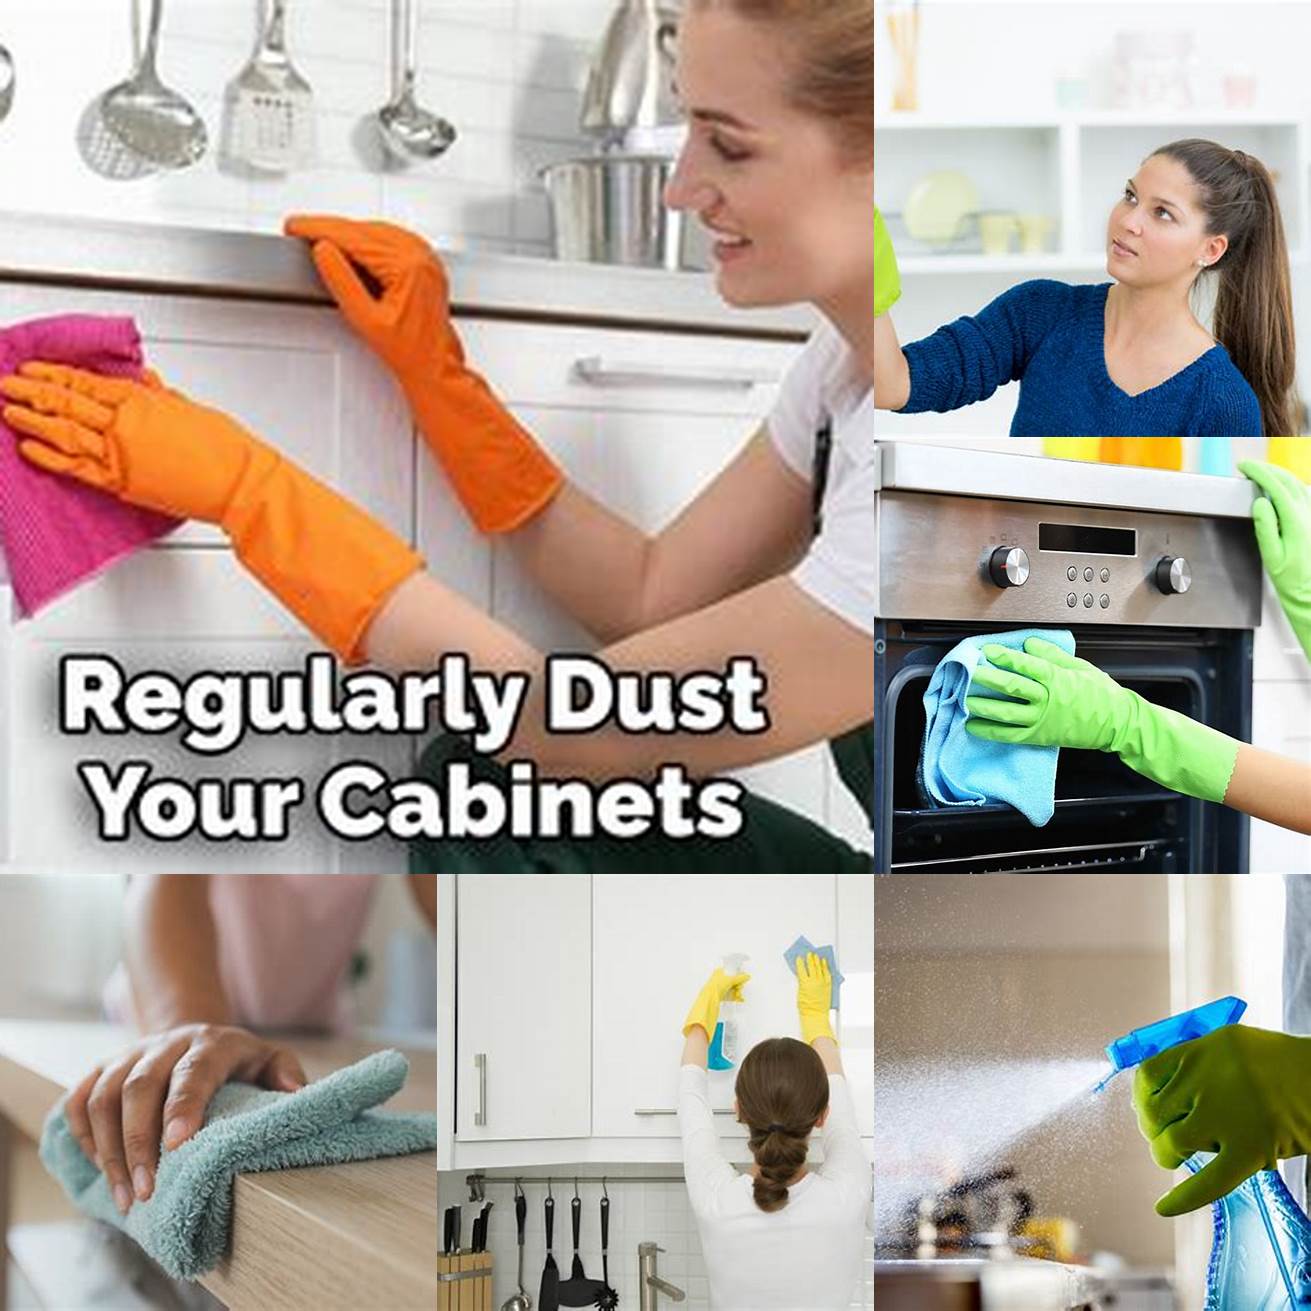 Maintain regularly Regularly clean and dust your cabinets to keep them in good condition and prevent dust and moisture from damaging your items